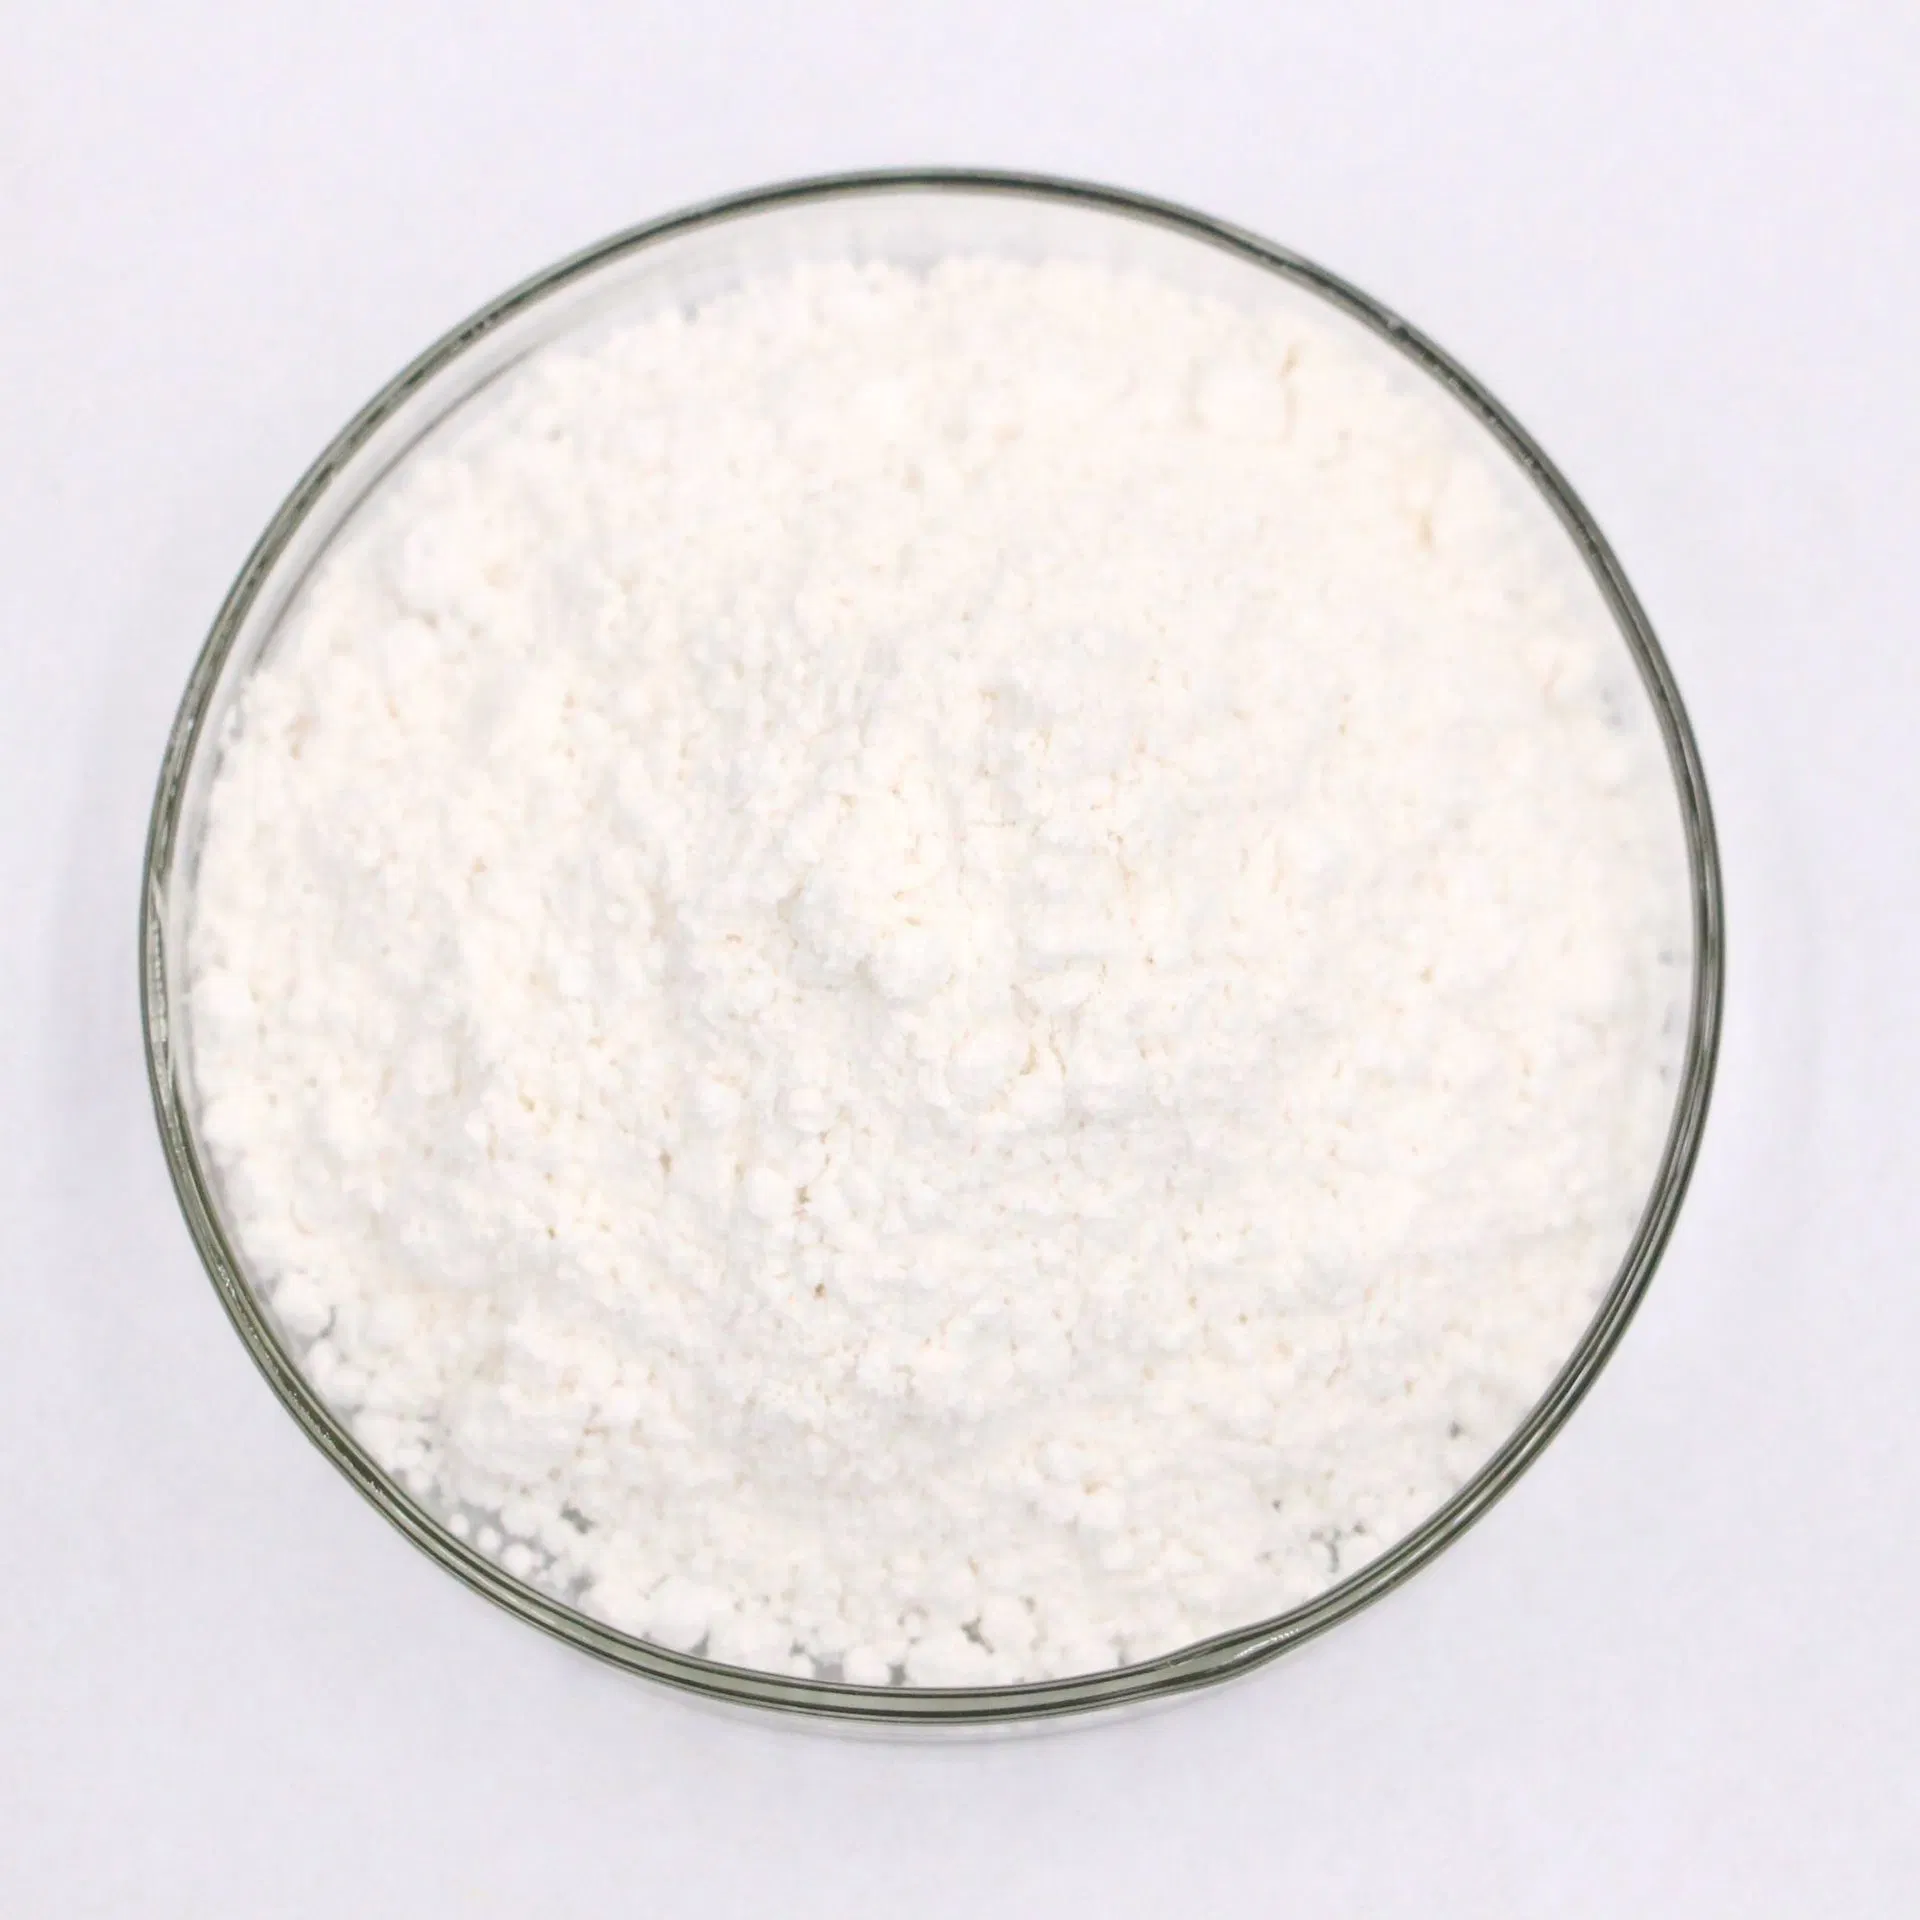 Factory Direct Supply Best Quality and Price 2- (4-Methoxyphenoxy) Propanoic Acid Used as a Sweetness Inhibitor for Sucrose and Other Sweeteners CAS 13794-15-5